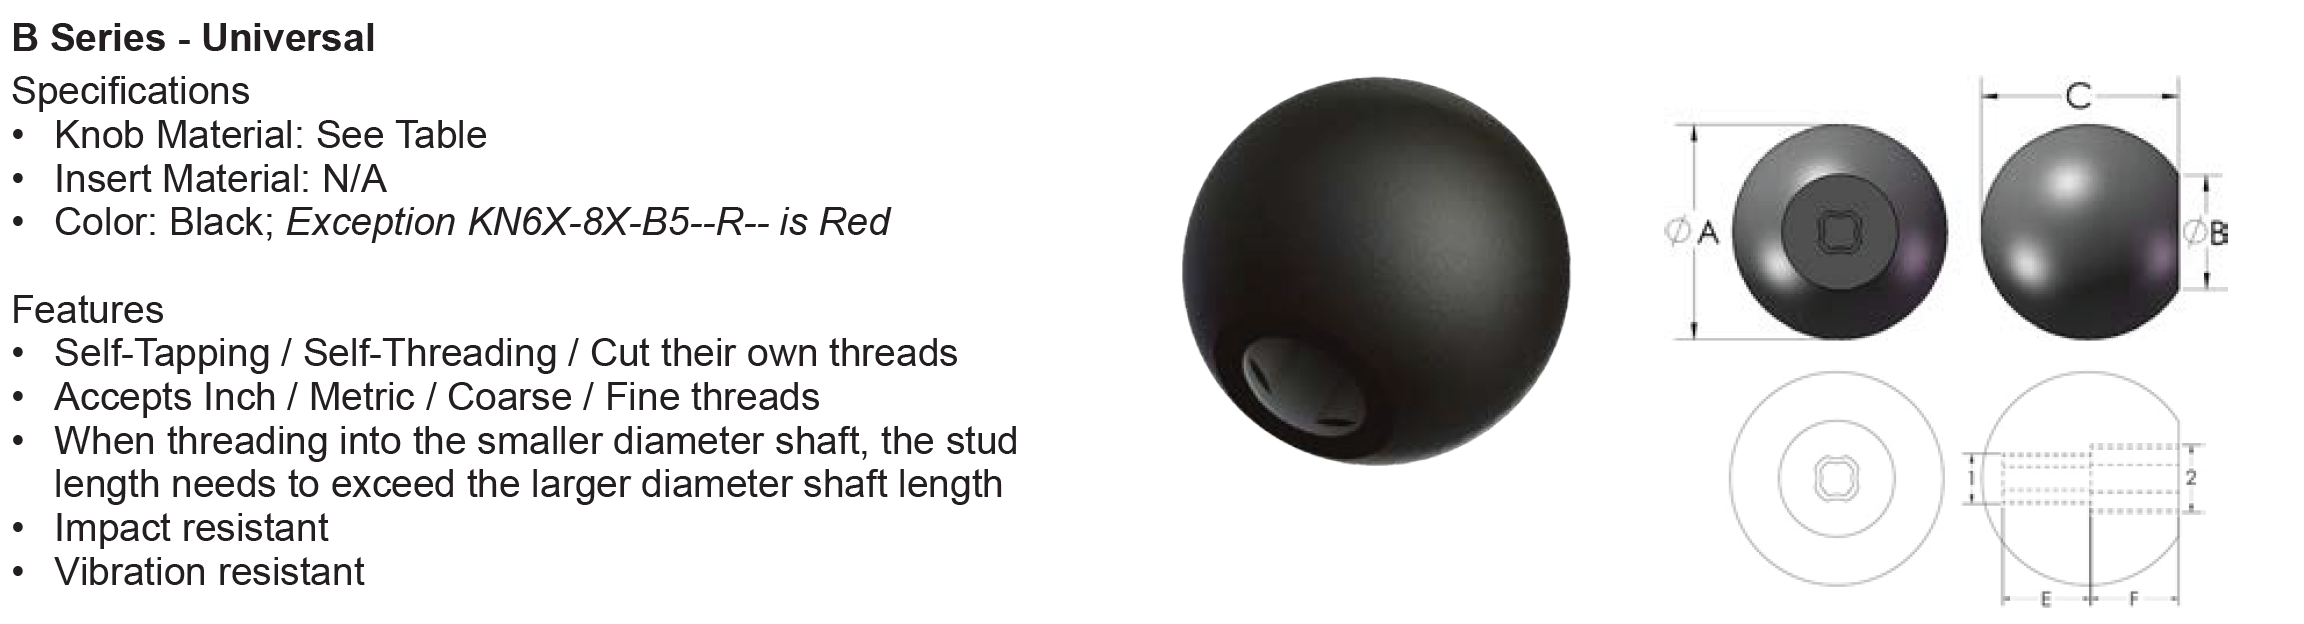 Innovative Components Plastic Clamp Knobs